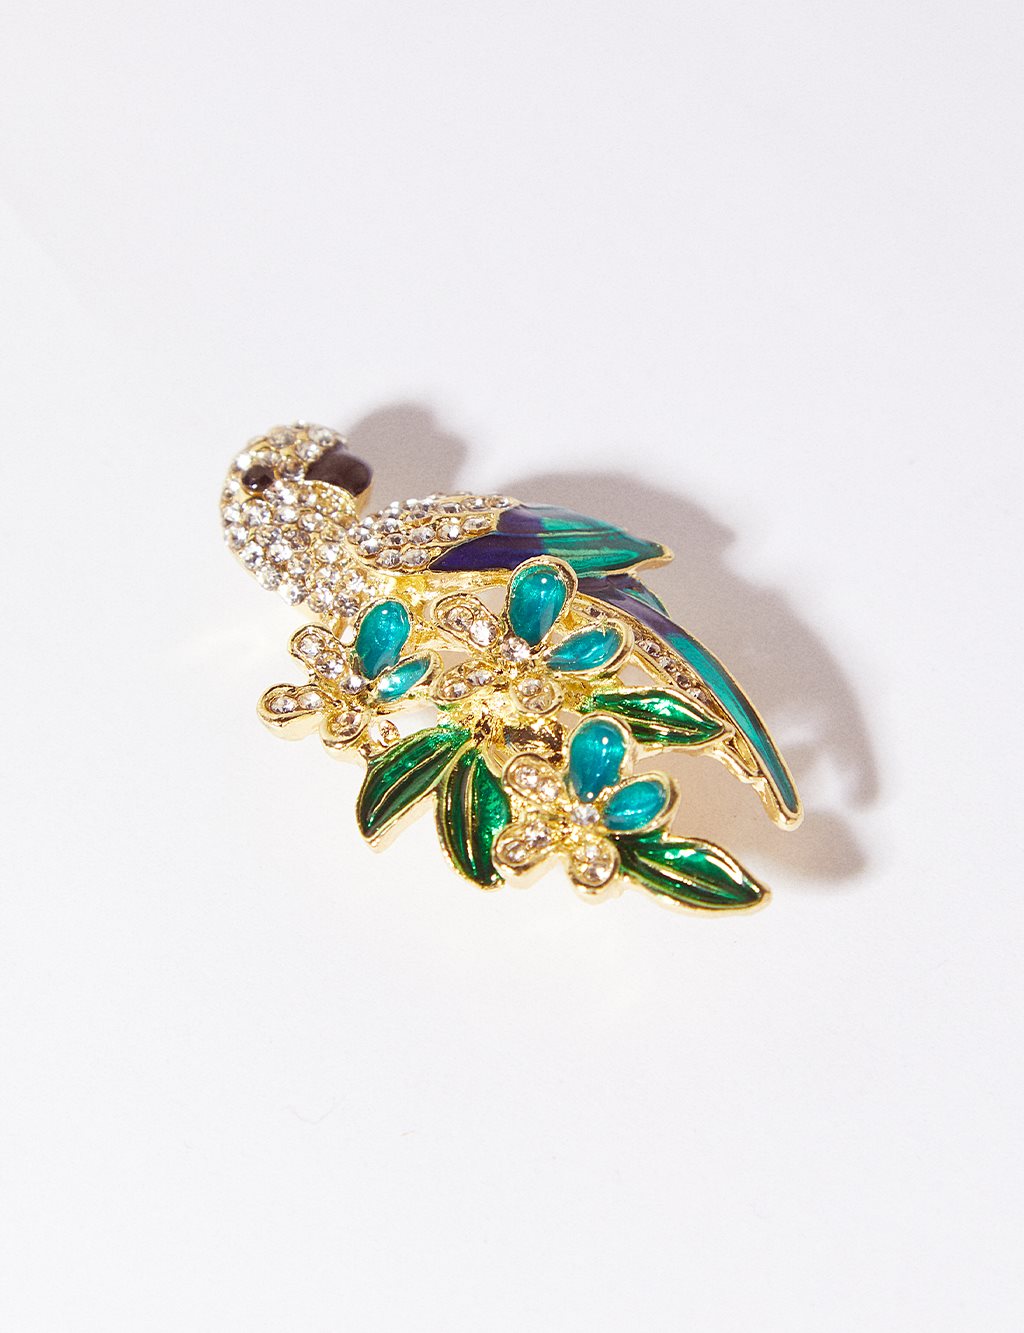 Parrot Figured Stone Brooch Gold